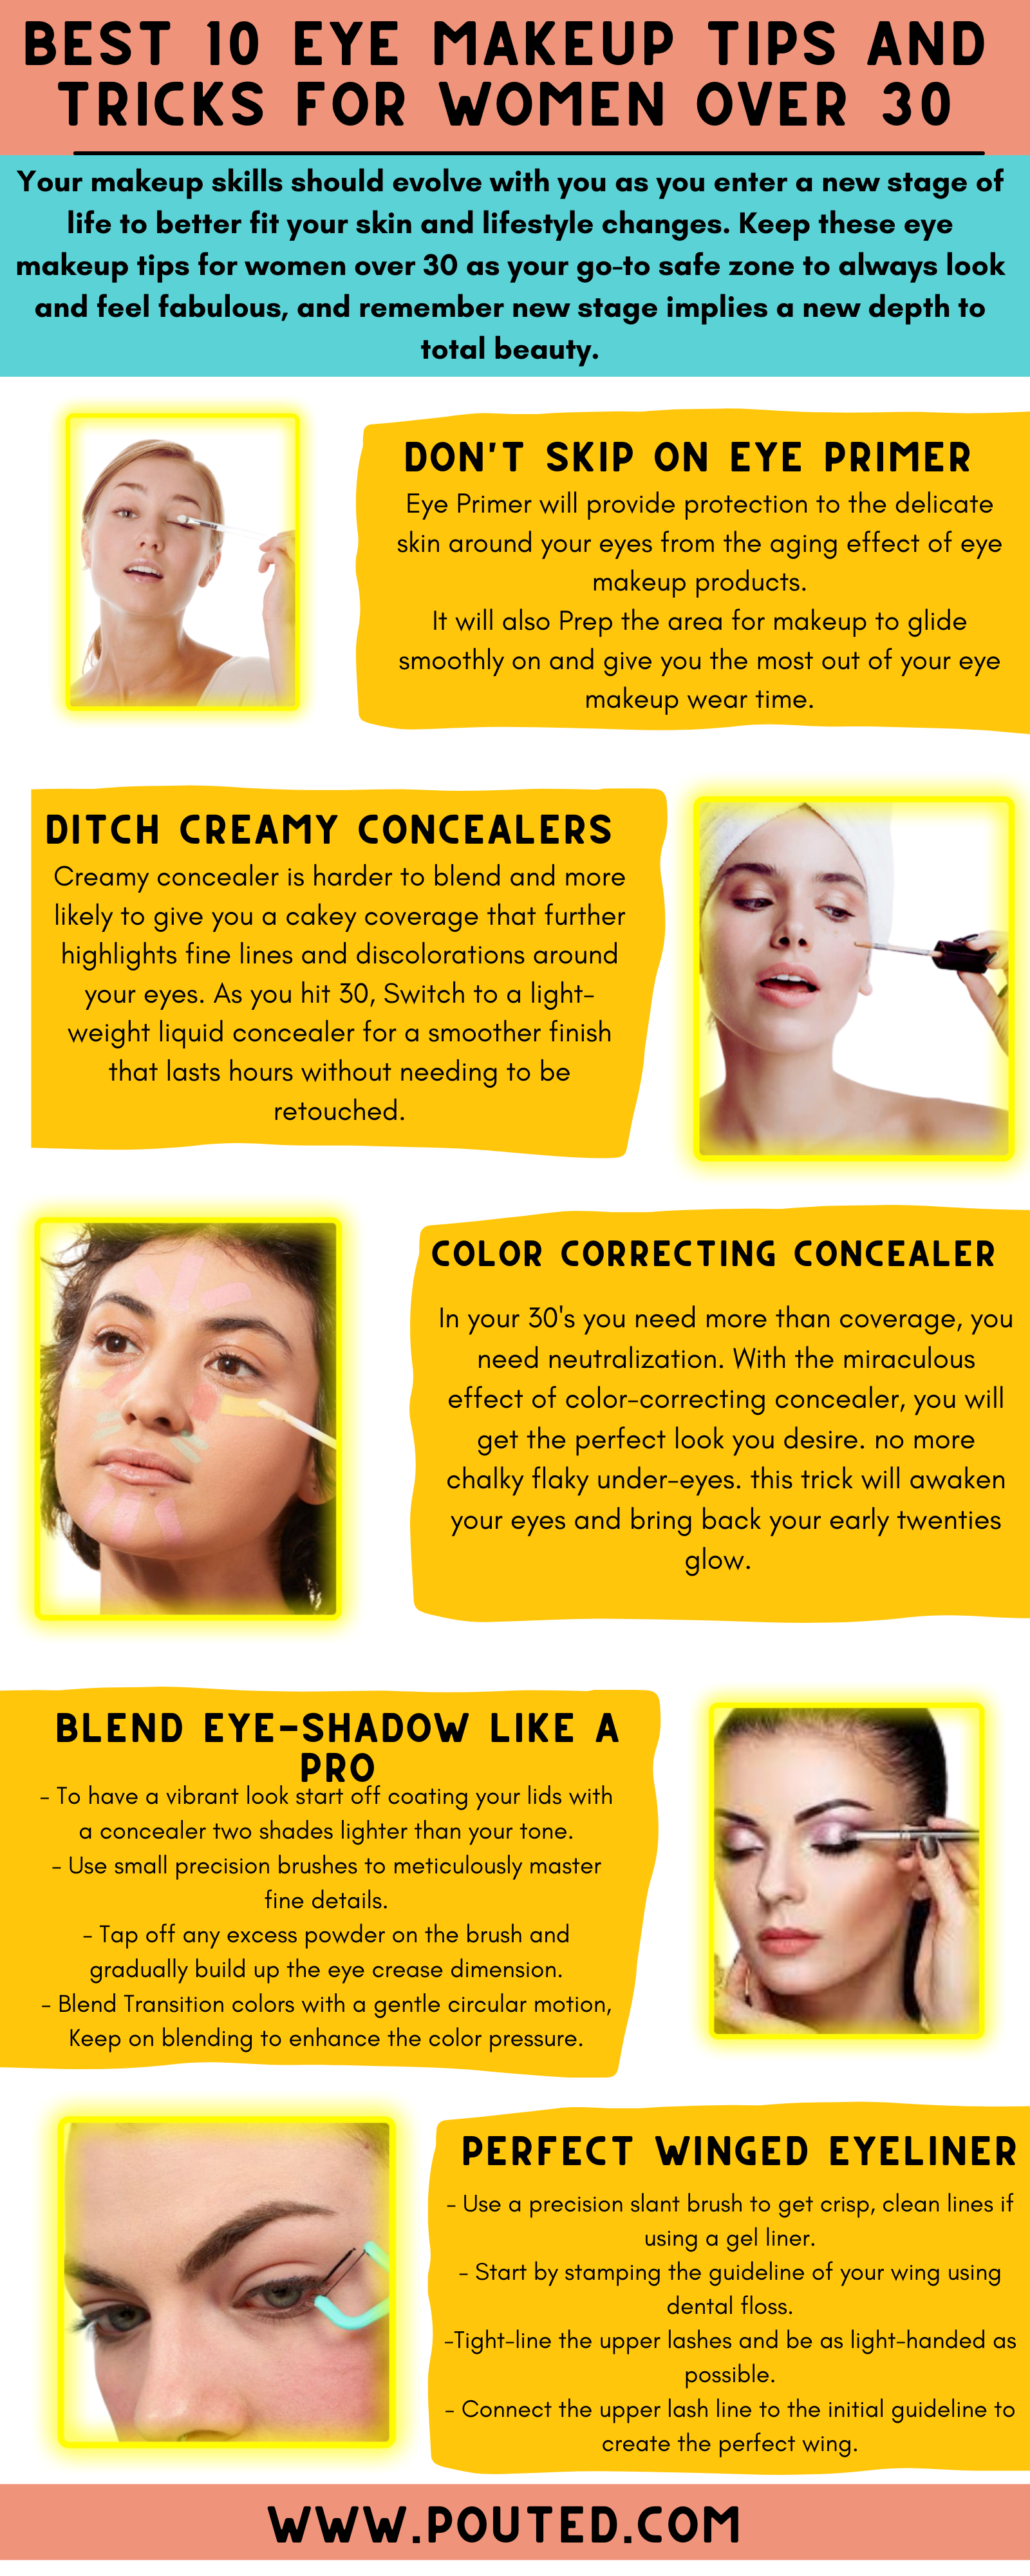 Best 10 Eye makeup tips and tricks for women over 30 